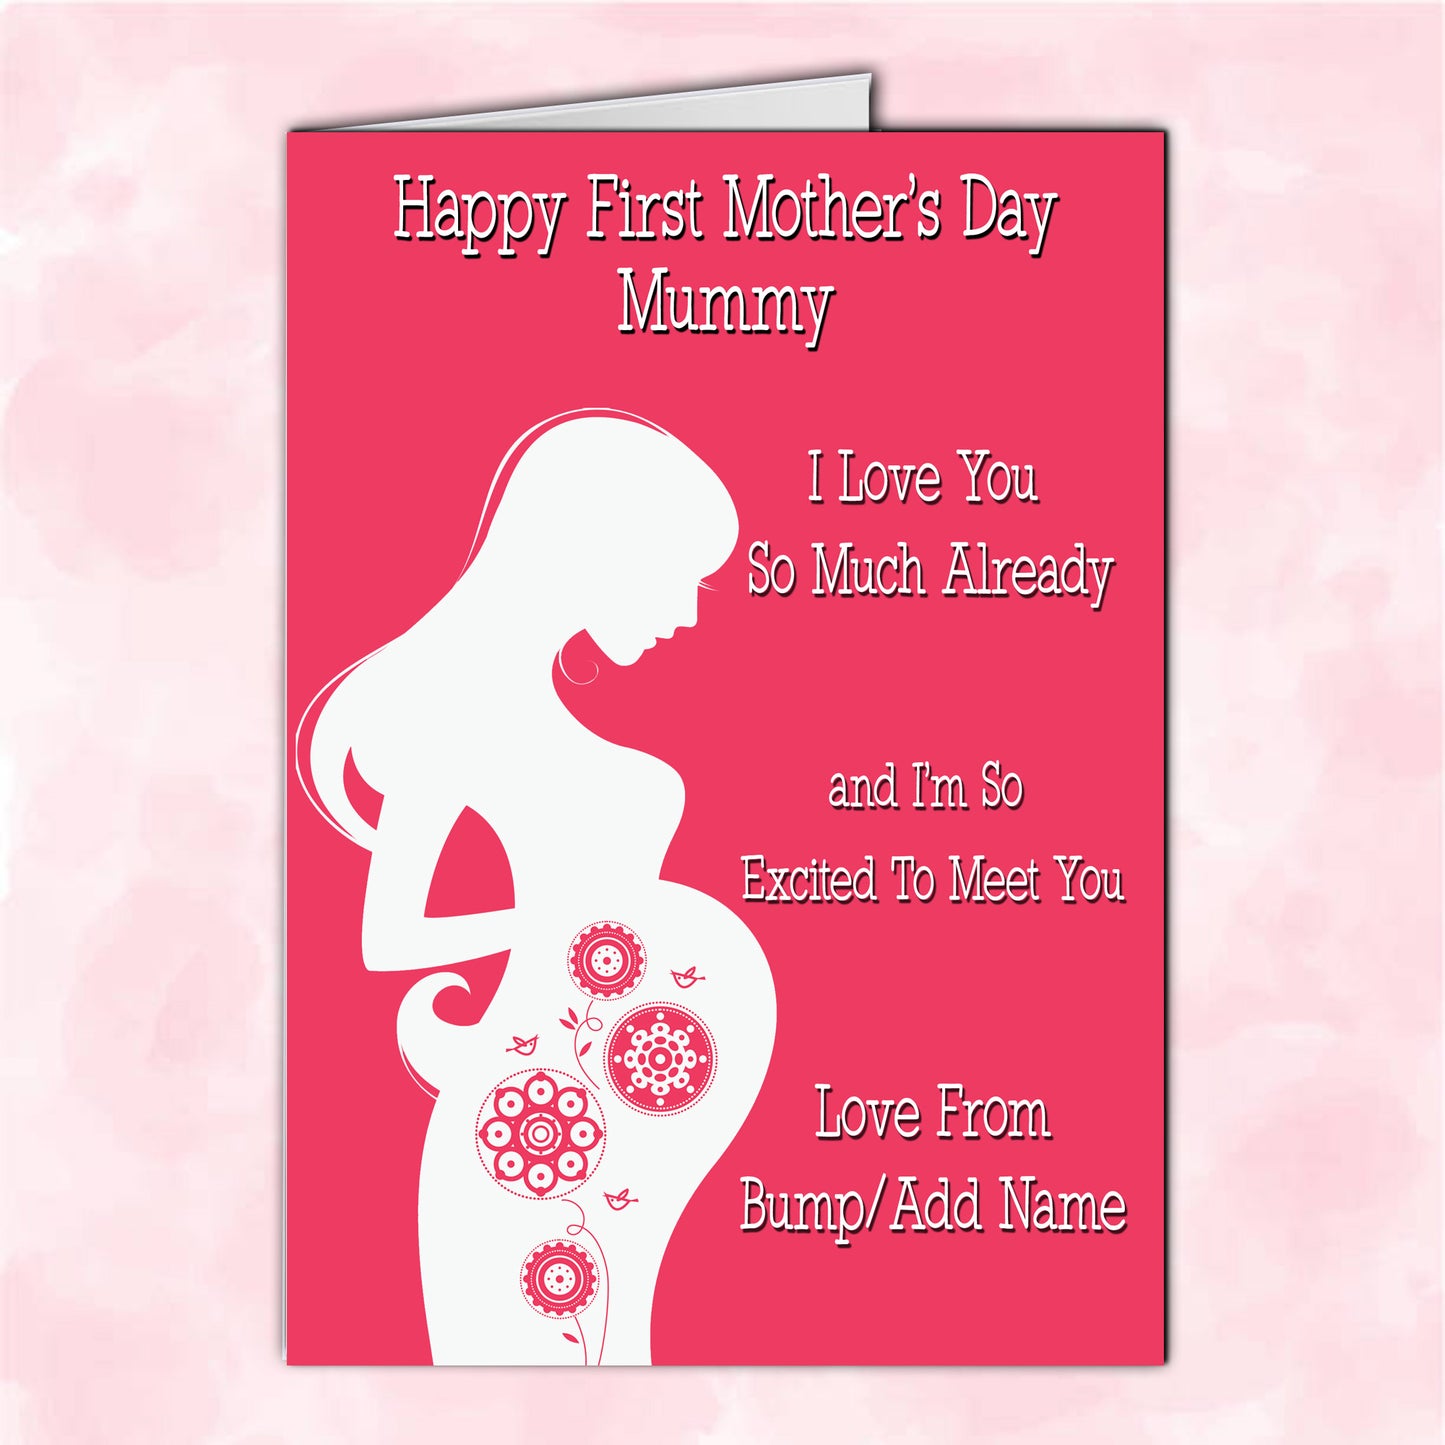 Happy First Mother's Day Pink Card